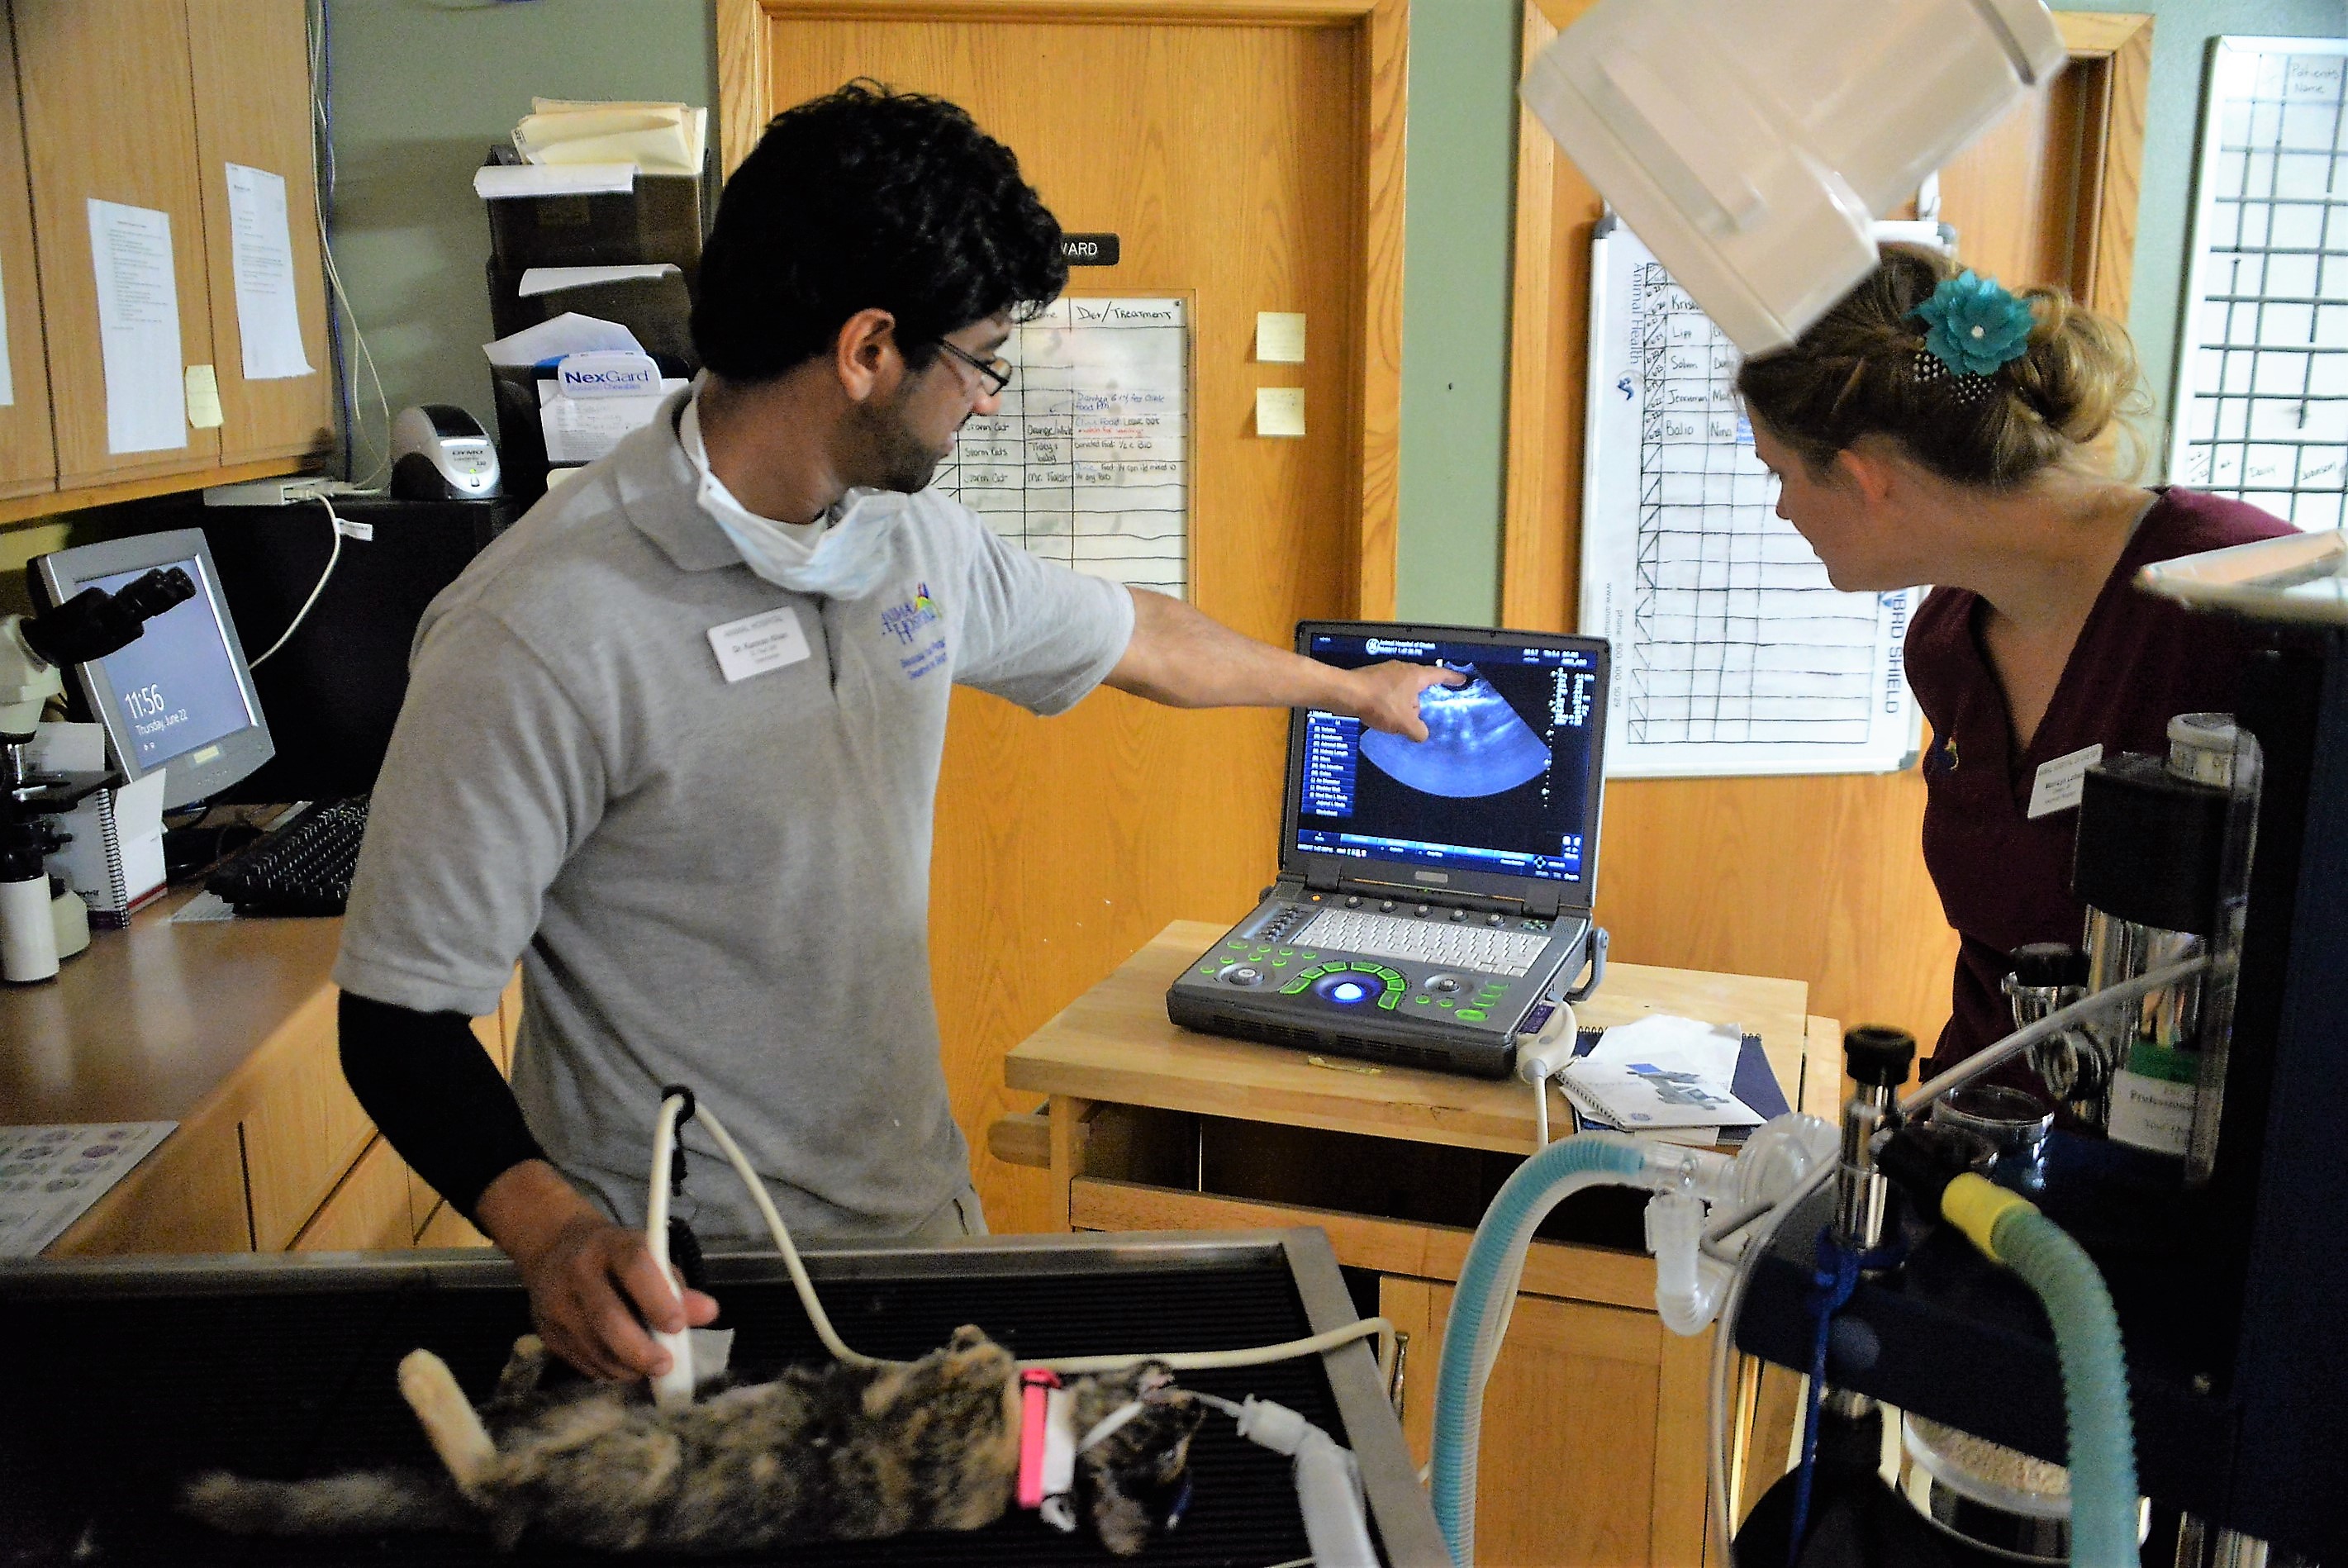 Our lab also includes 3-D ultrasound and digital X-Rays that Dr. Kuchevar & Dr. Khan can use to help diagnose illnesses more quickly and initiate specific treatment the same day. 